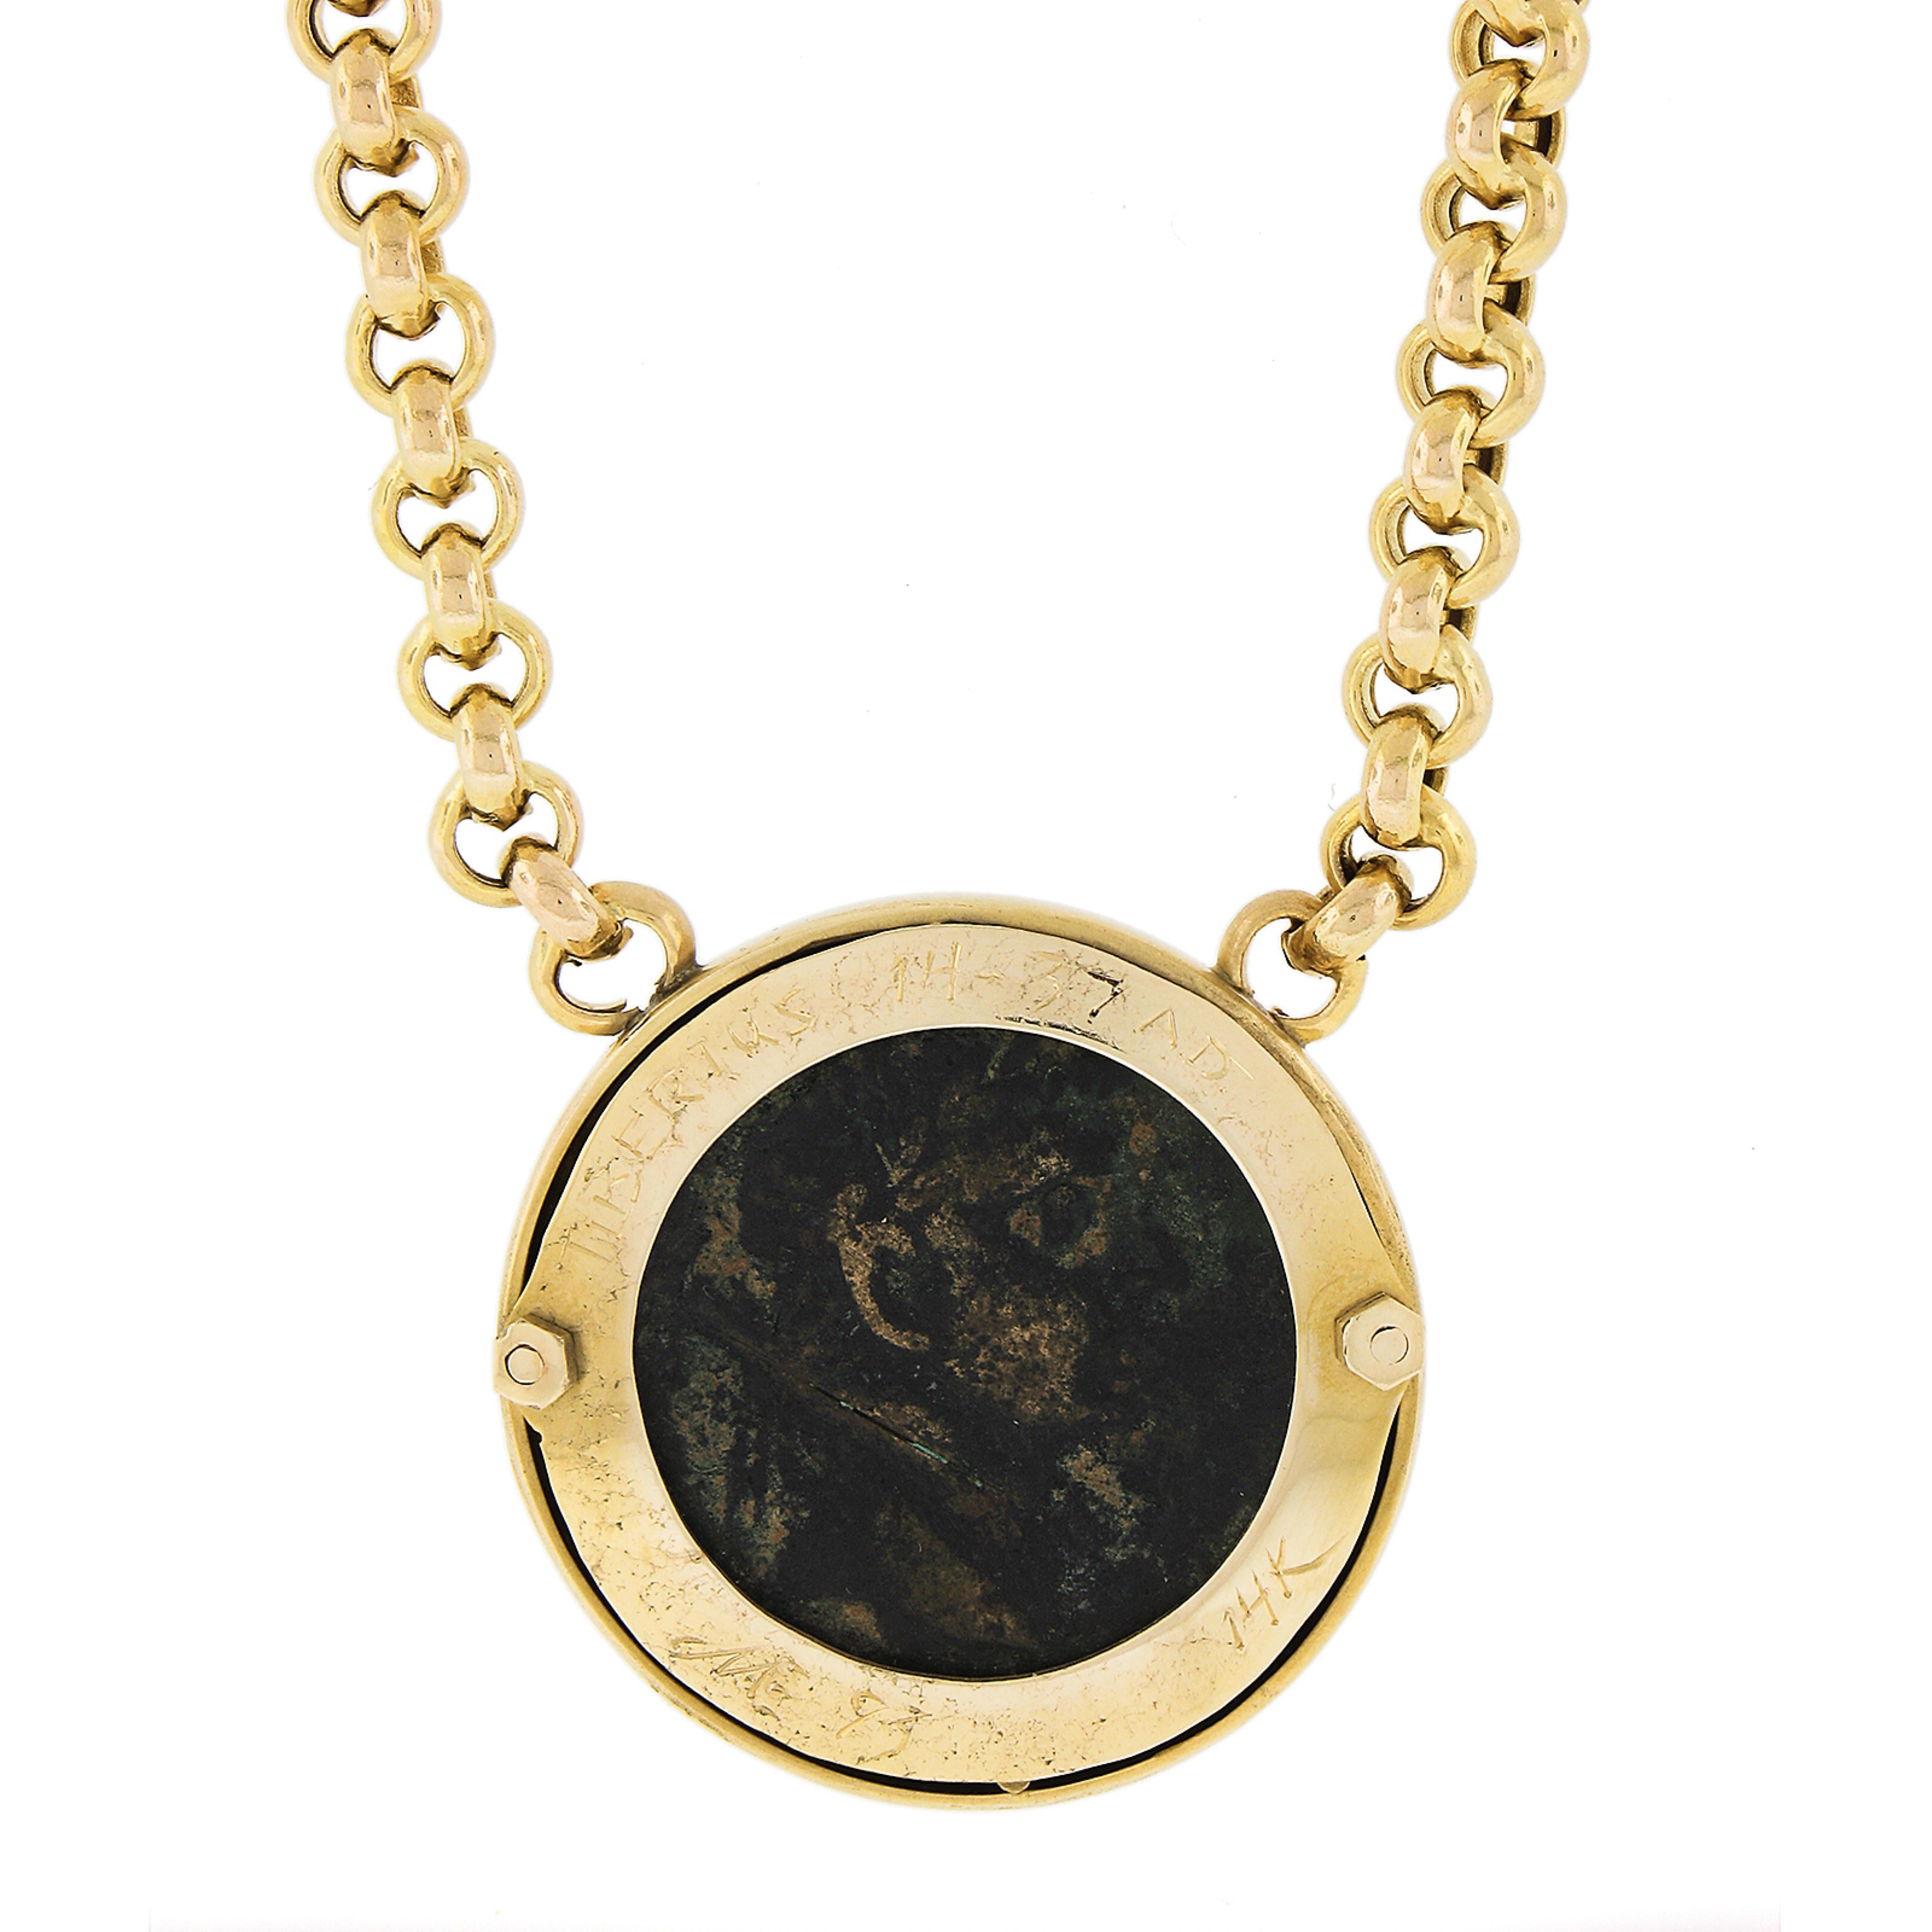 Material: Solid 14K Yellow Gold Pendant Frame & Chain w/ Metal Coin
Total Weight: 36.33 Grams
Pendant Diameter:	32.3mm (1.2